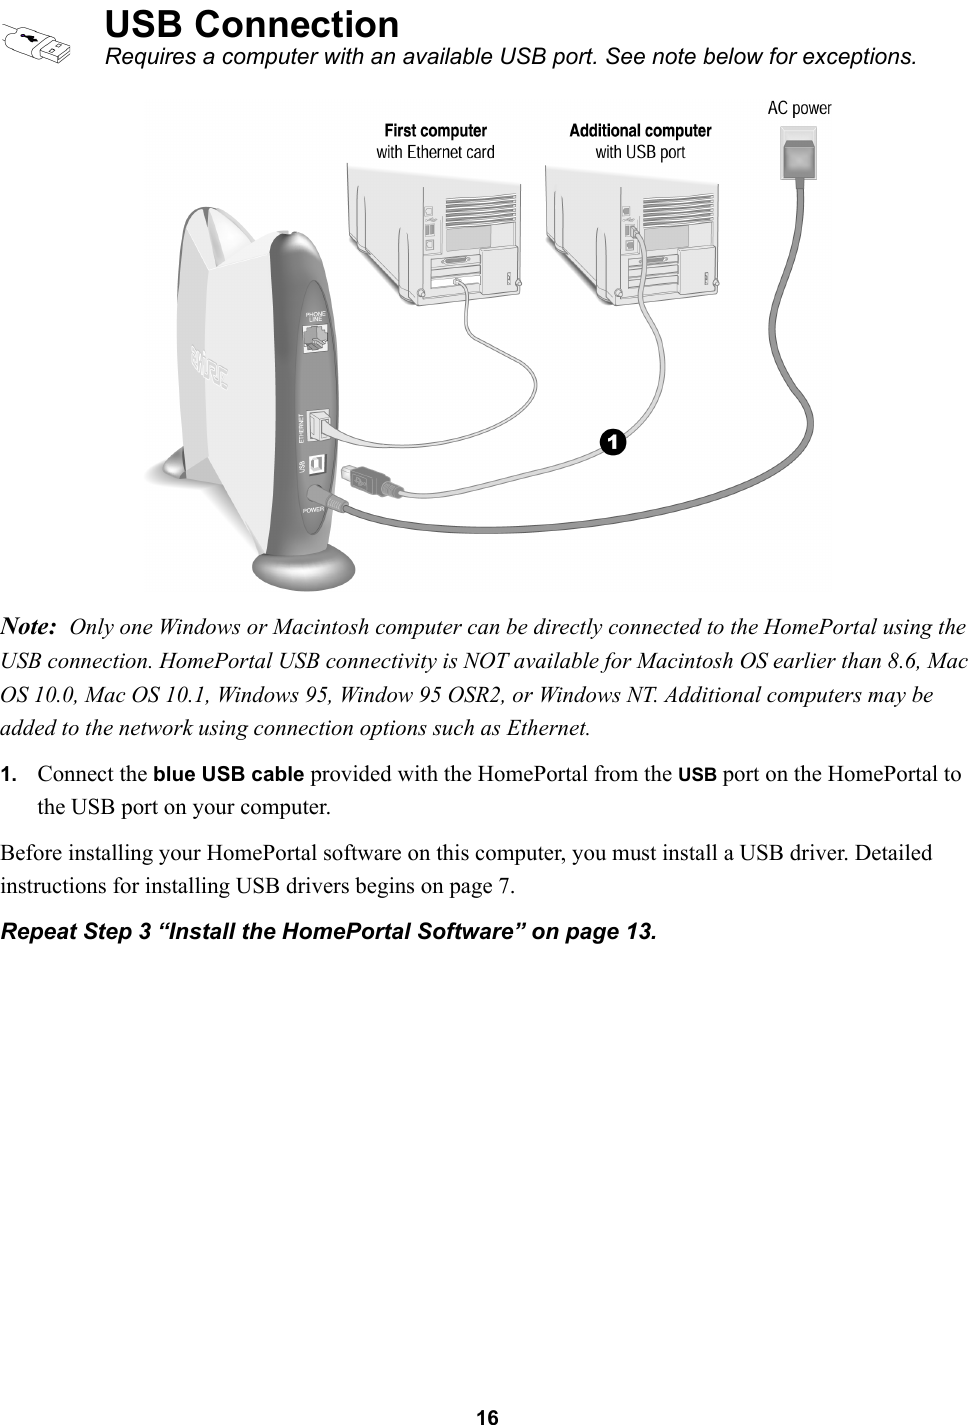 16Note: Only one Windows or Macintosh computer can be directly connected to the HomePortal using the USB connection. HomePortal USB connectivity is NOT available for Macintosh OS earlier than 8.6, Mac OS 10.0, Mac OS 10.1, Windows 95, Window 95 OSR2, or Windows NT. Additional computers may be added to the network using connection options such as Ethernet.1. Connect the blue USB cable provided with the HomePortal from the USB port on the HomePortal to the USB port on your computer.Before installing your HomePortal software on this computer, you must install a USB driver. Detailed instructions for installing USB drivers begins on page 7.Repeat Step 3 “Install the HomePortal Software” on page 13.USB ConnectionRequires a computer with an available USB port. See note below for exceptions.